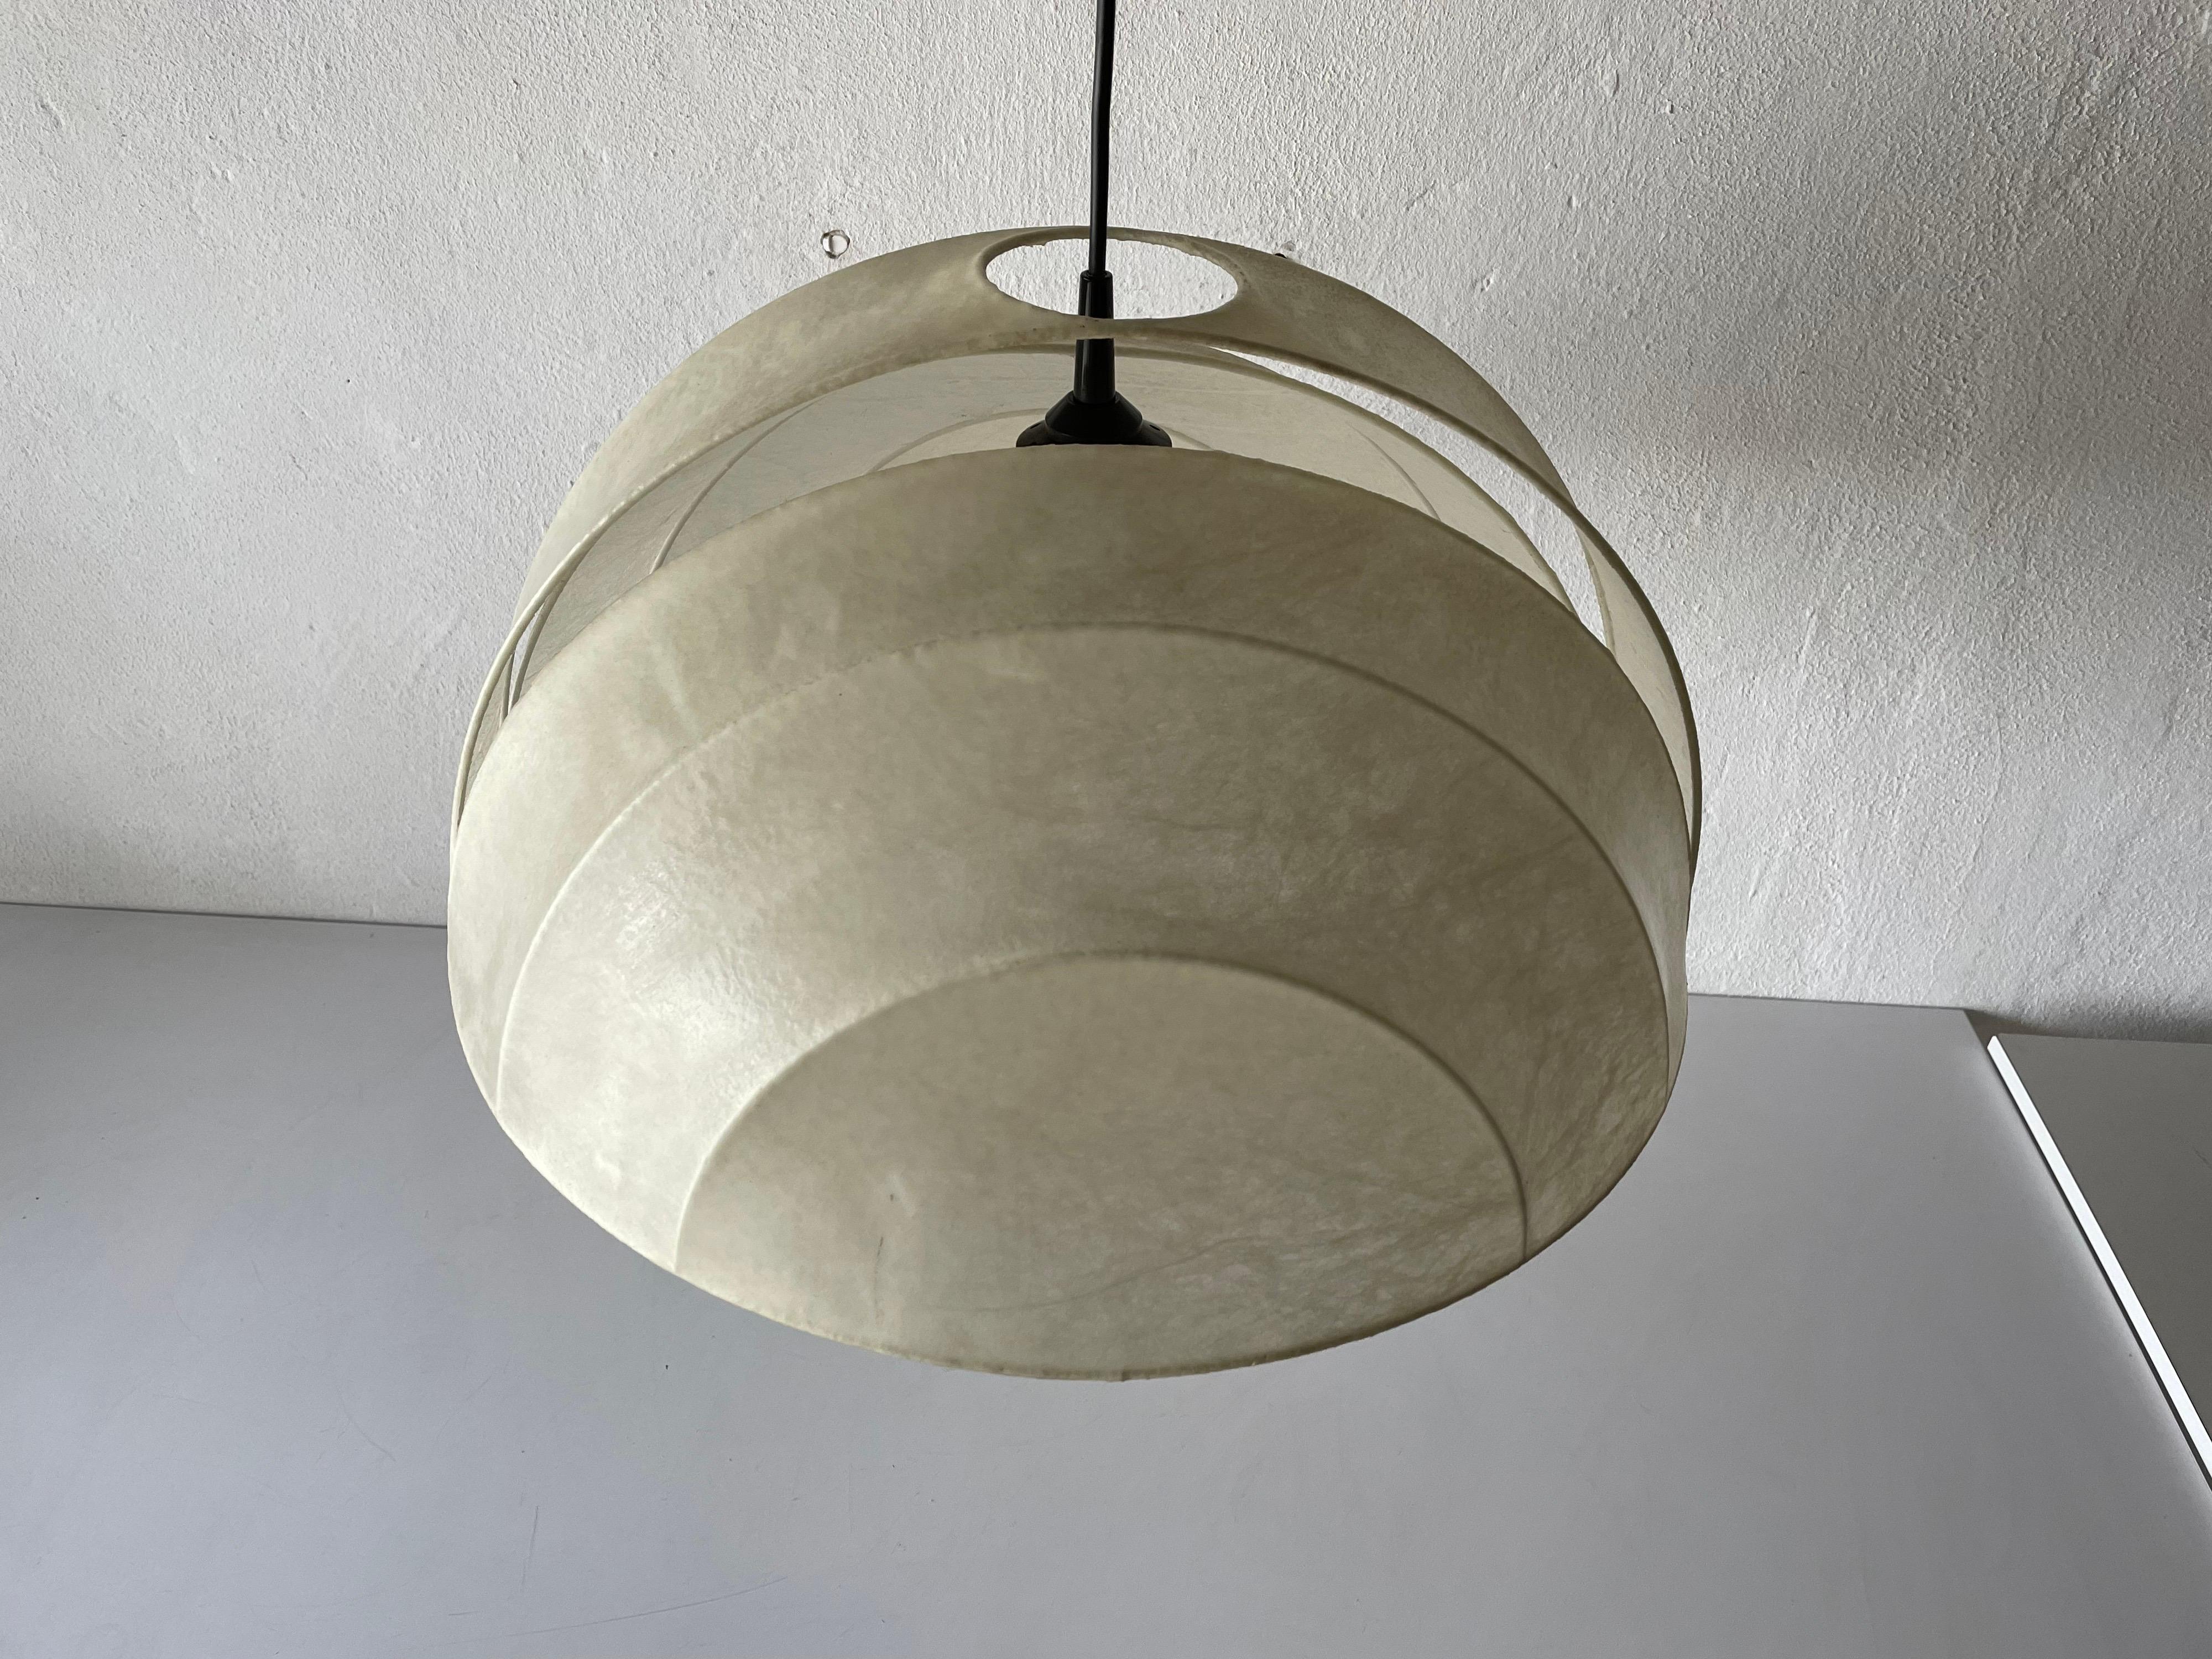 Ball cocoon pendant lamp by Goldkant, 1960s, Germany
 
Lampshade is in very good vintage condition.

This lamp works with E27 light bulb. Max 100W
Wired and suitable to use with 220V and 110V for all countries.

Measurements:
Diameter: 50